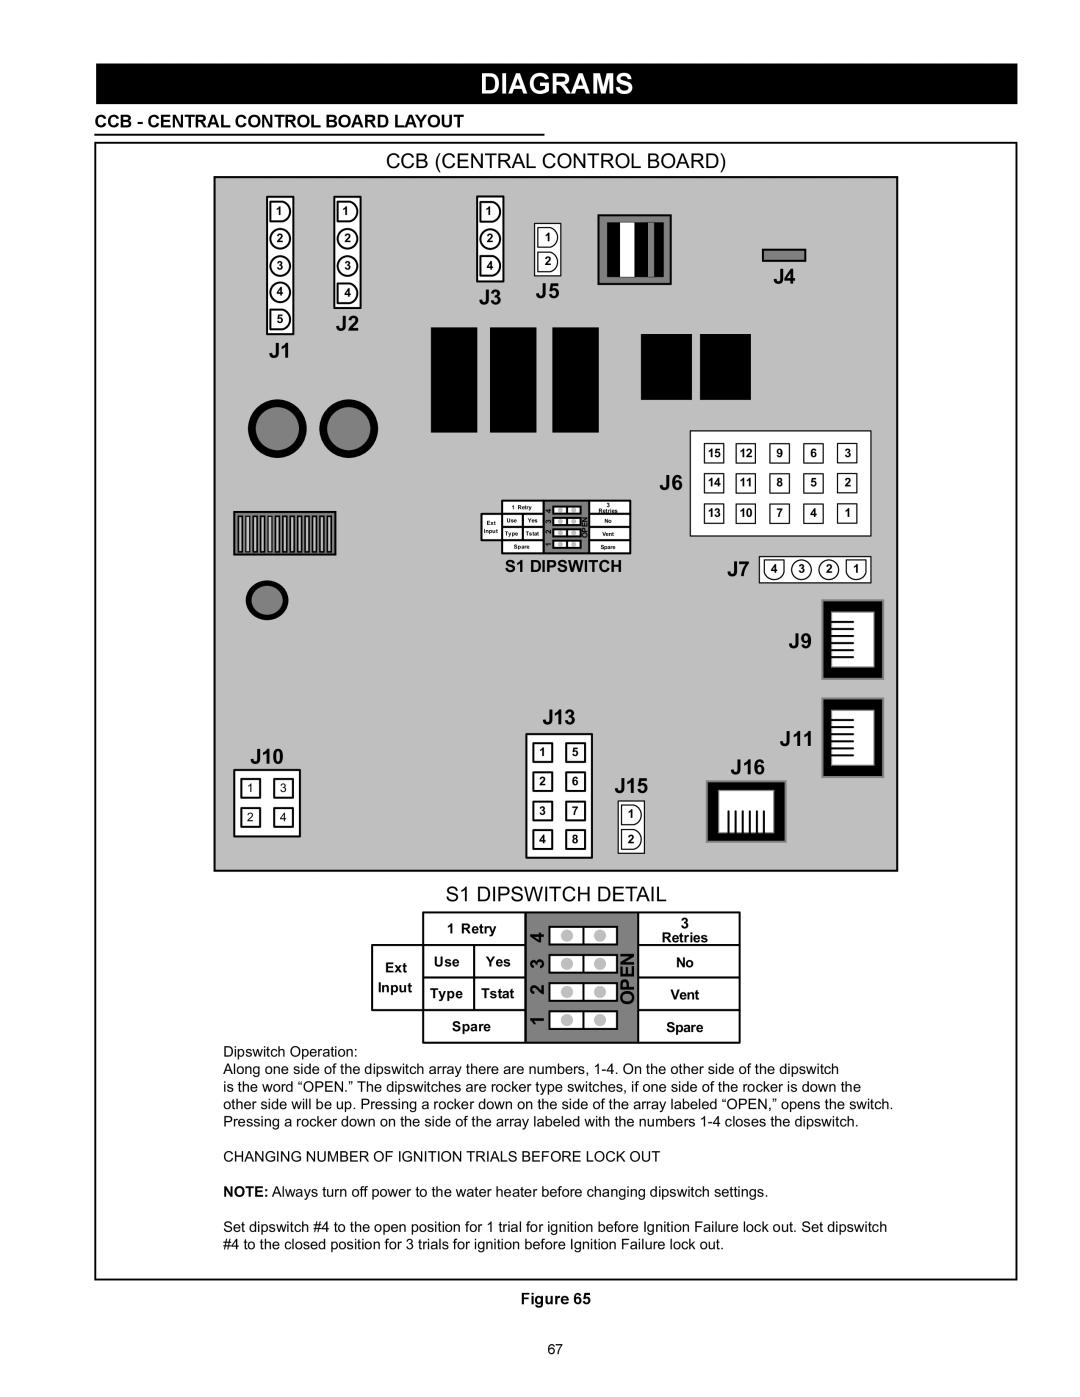 State Industries SUF-100-250, SUF-60-120 Diagrams, 5 J2 J1, J3 J5, Ccb Central Control Board, S1 DIPSWITCH DETAIL 